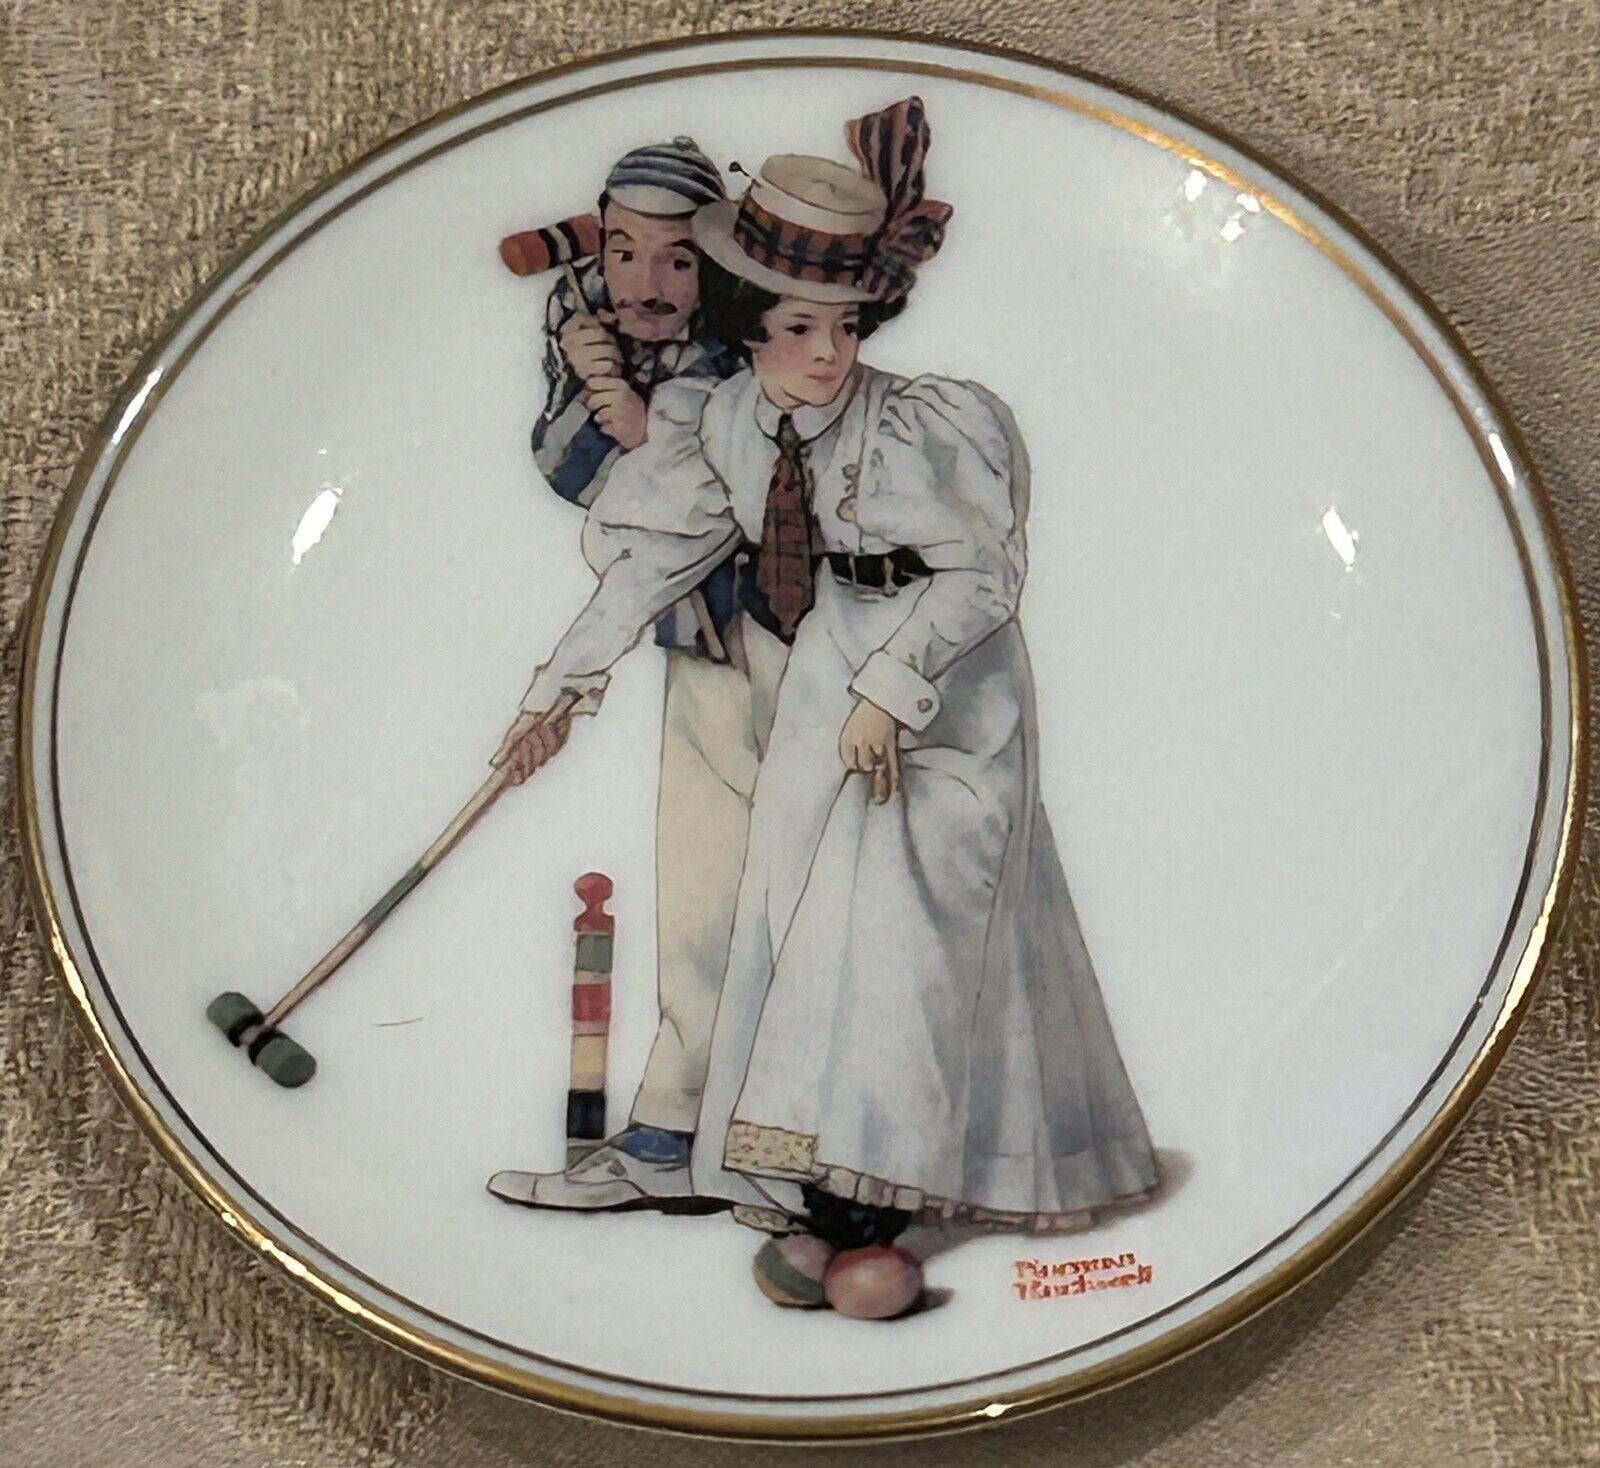 Norman Rockwell Miniature Collector’s Plate  “CROQUET” Vintage D1-51